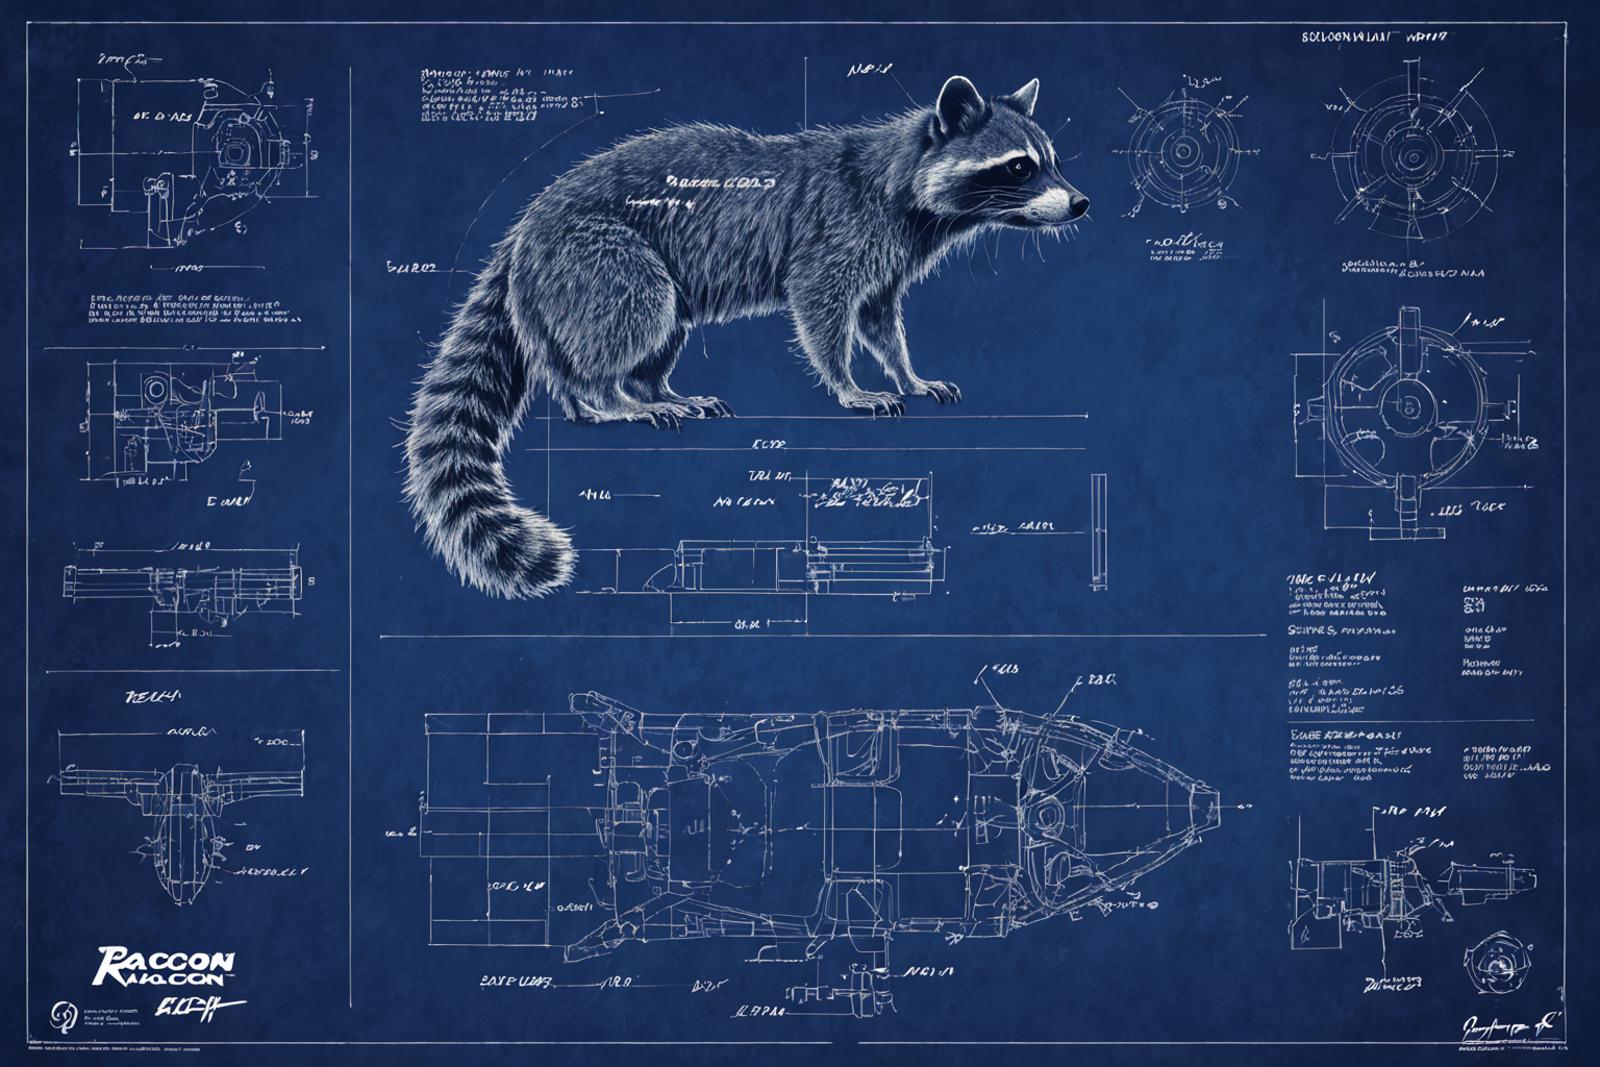 Blueprint of a Raccoon: A detailed drawing of a raccoon with a blue background.